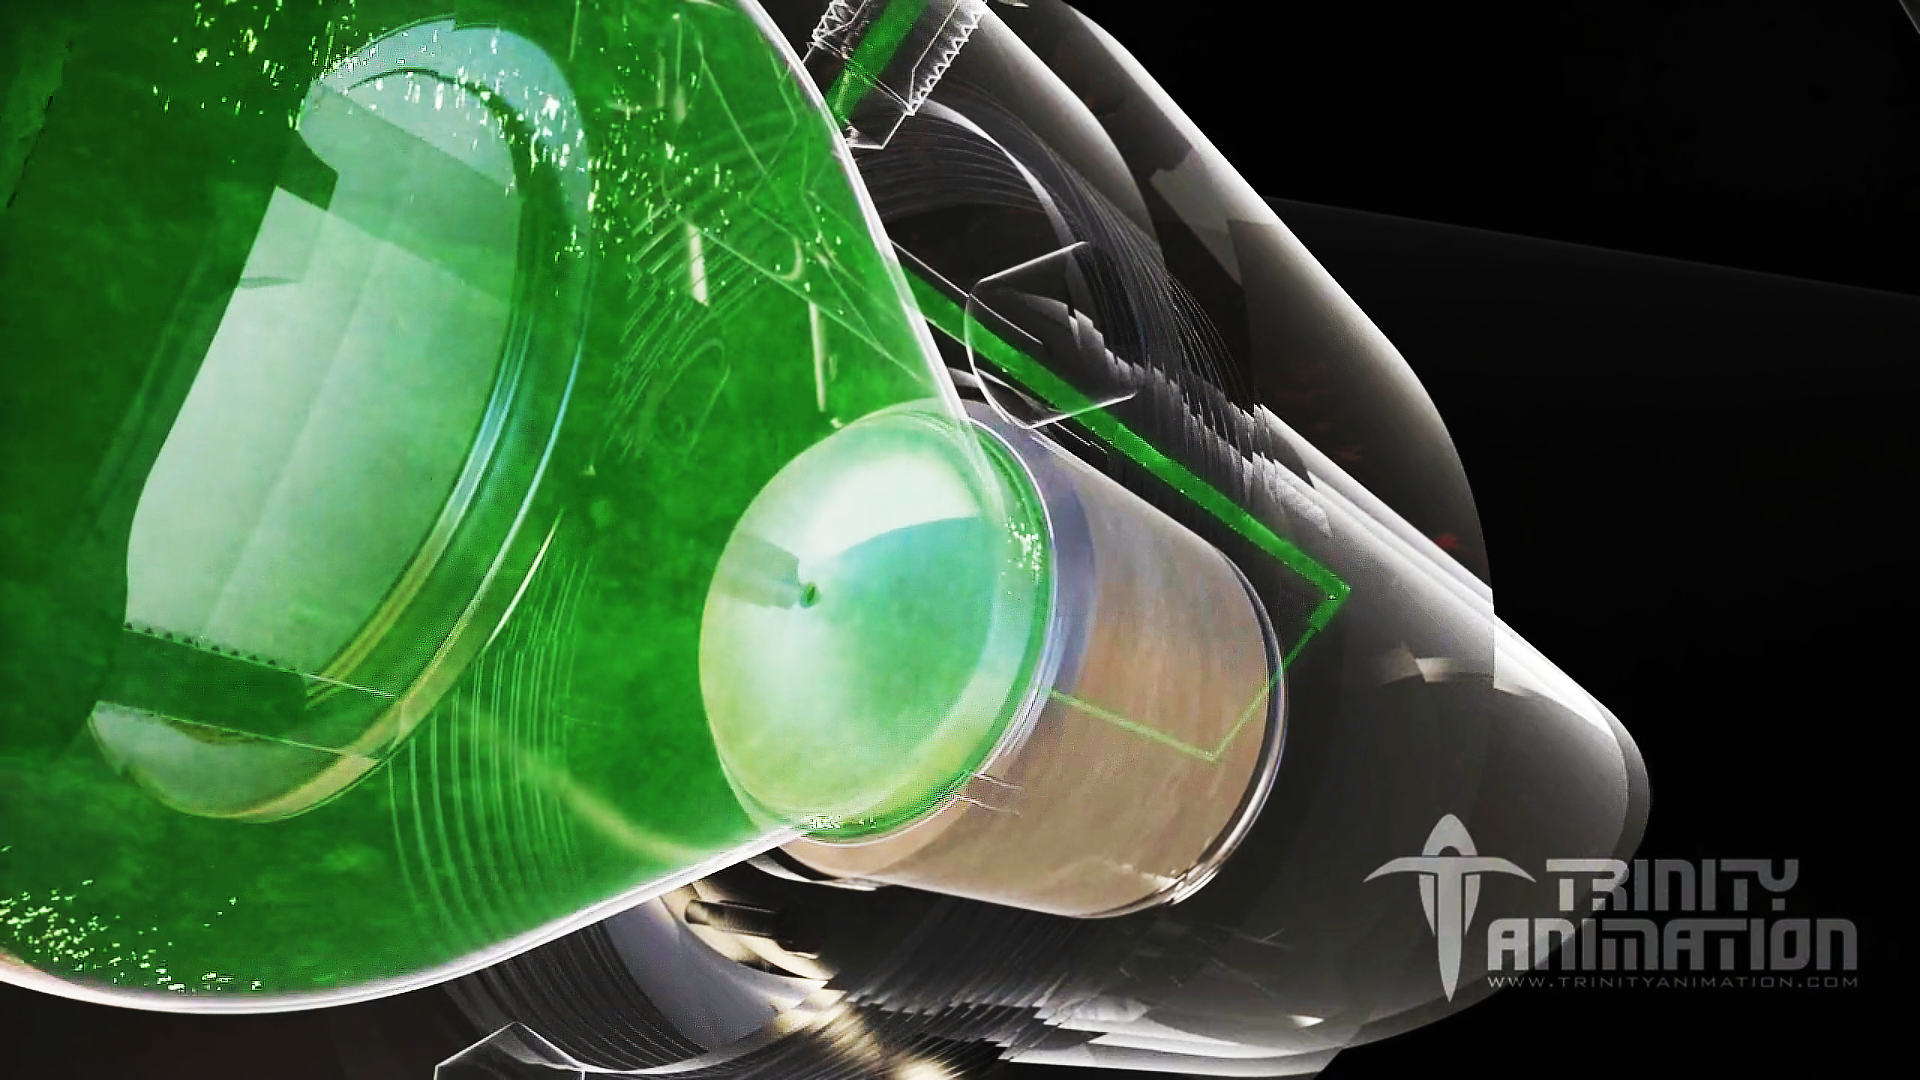 This is a 3D rendered image from Trinity's cad animation demonstrates how the StillX fuel system operates. This image displays a close-up dynamic angle of the receiver. The second fuel stream is being diverted through a piston in the lower house of the receiver. The fuel is represented as a green liquid and the components are transparent so the viewer can see the fuel flowing through the the parts.